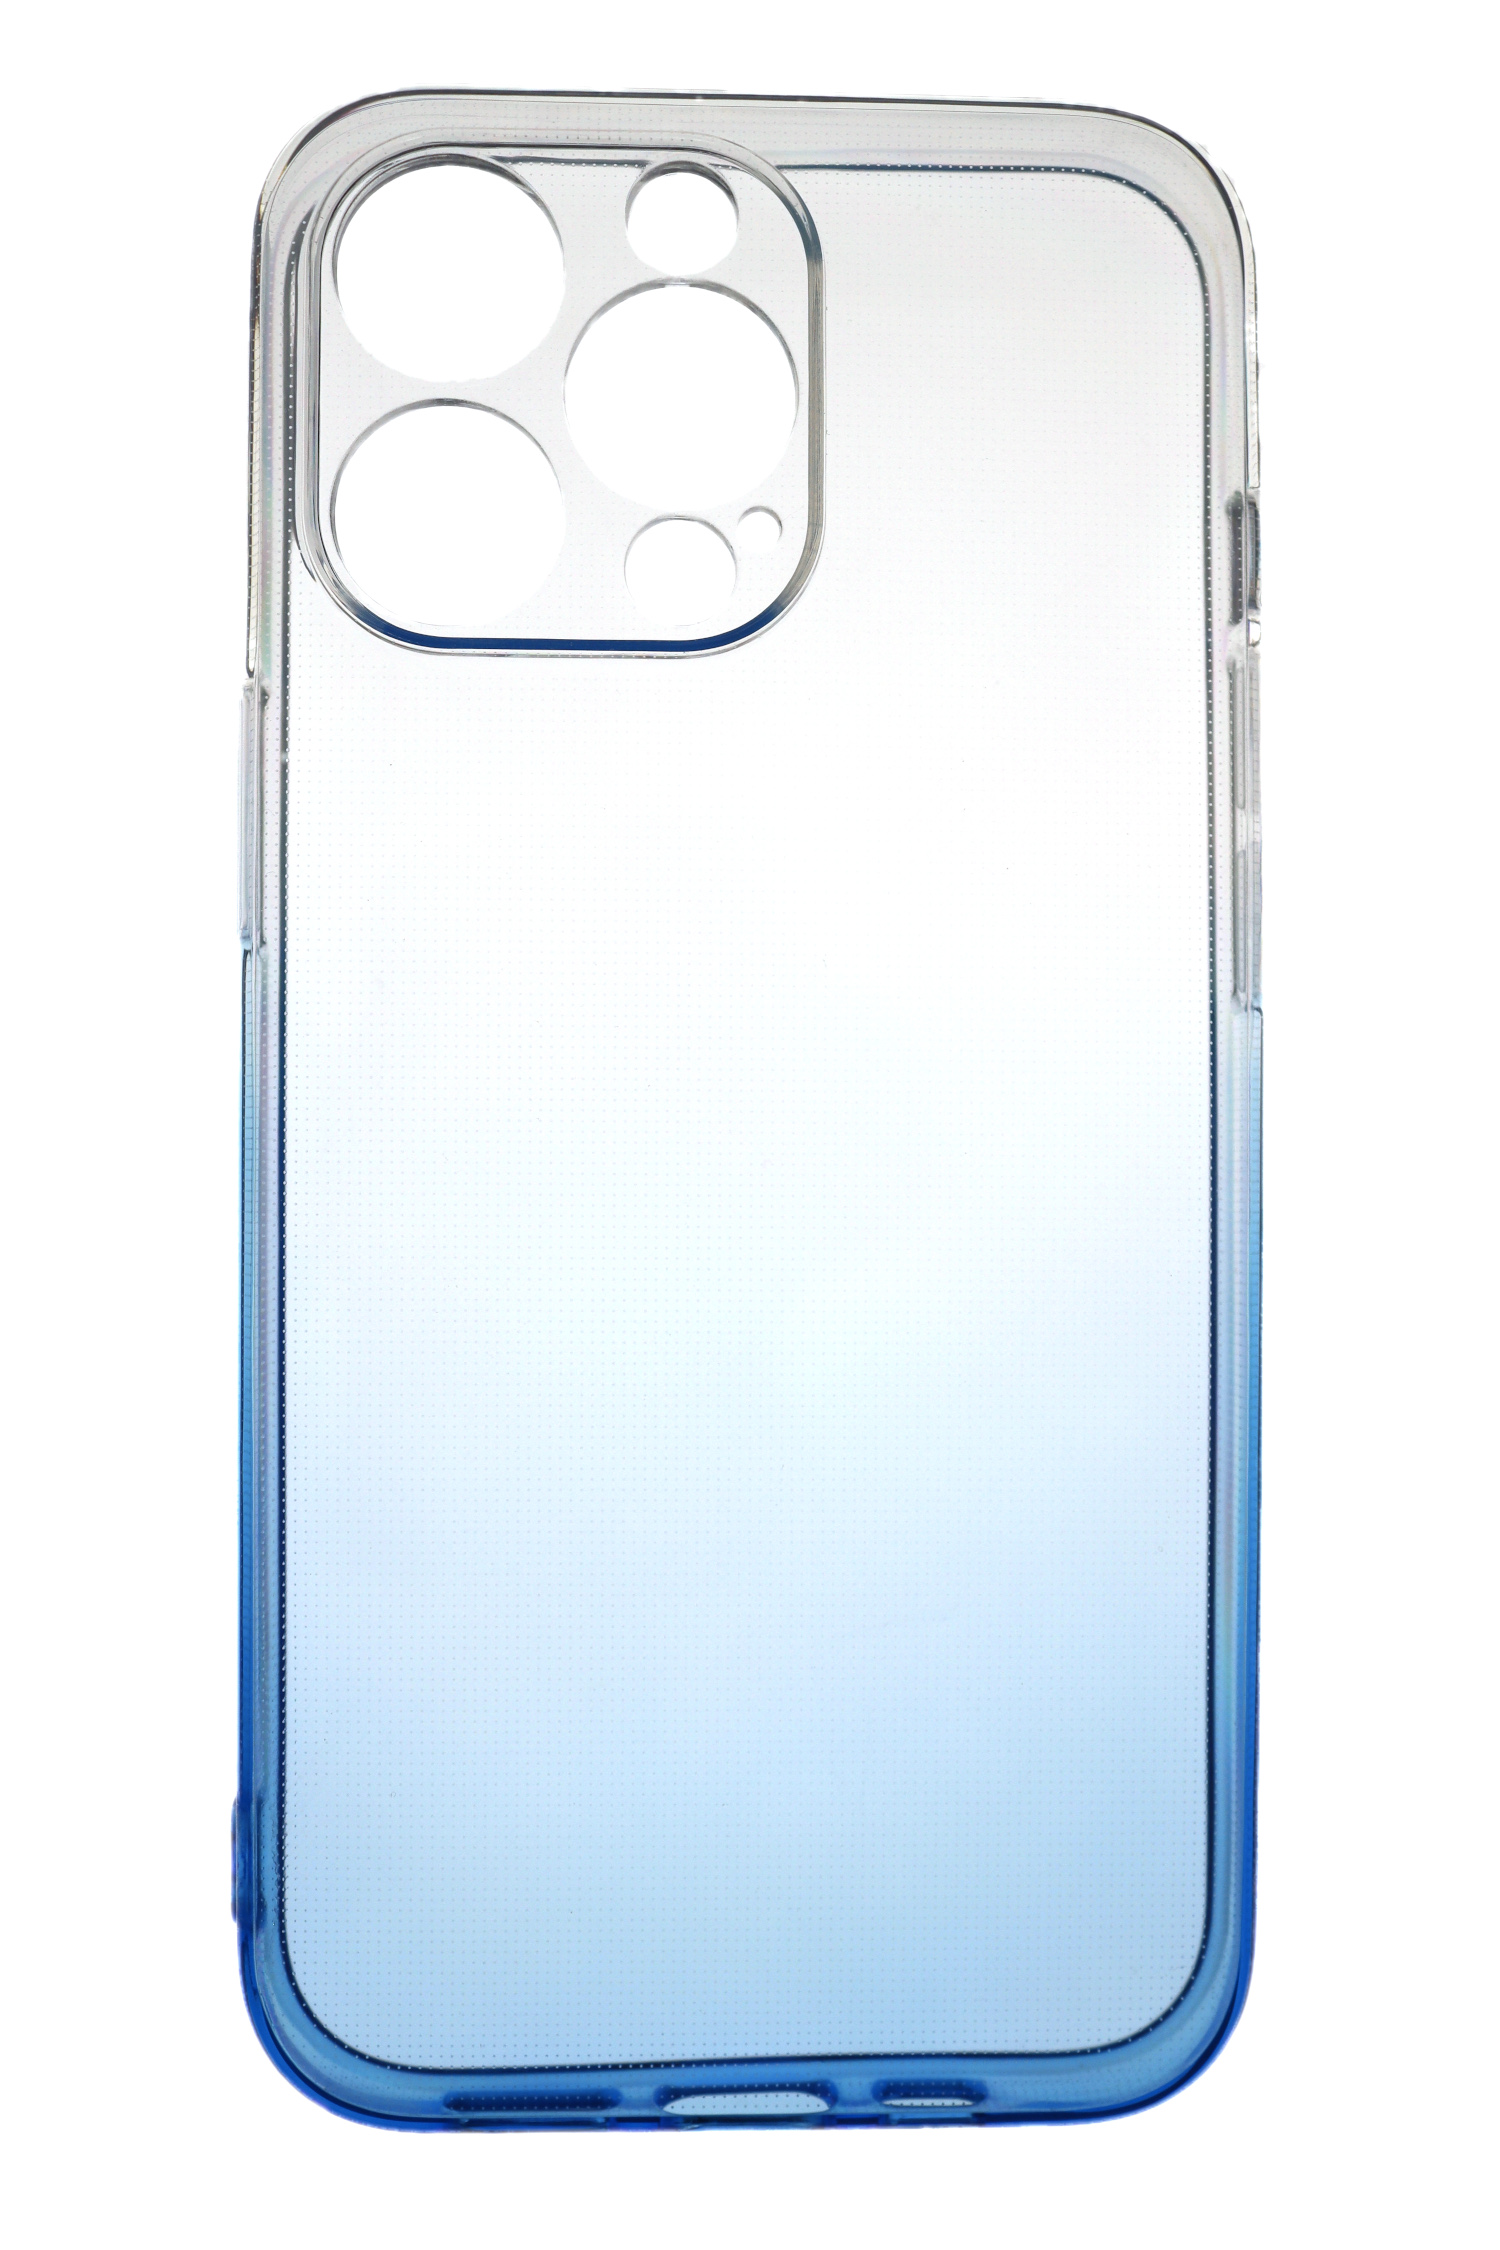 JAMCOVER 2.0 mm 13 Case Pro, Apple, Transparent iPhone Backcover, Blau, Strong, TPU